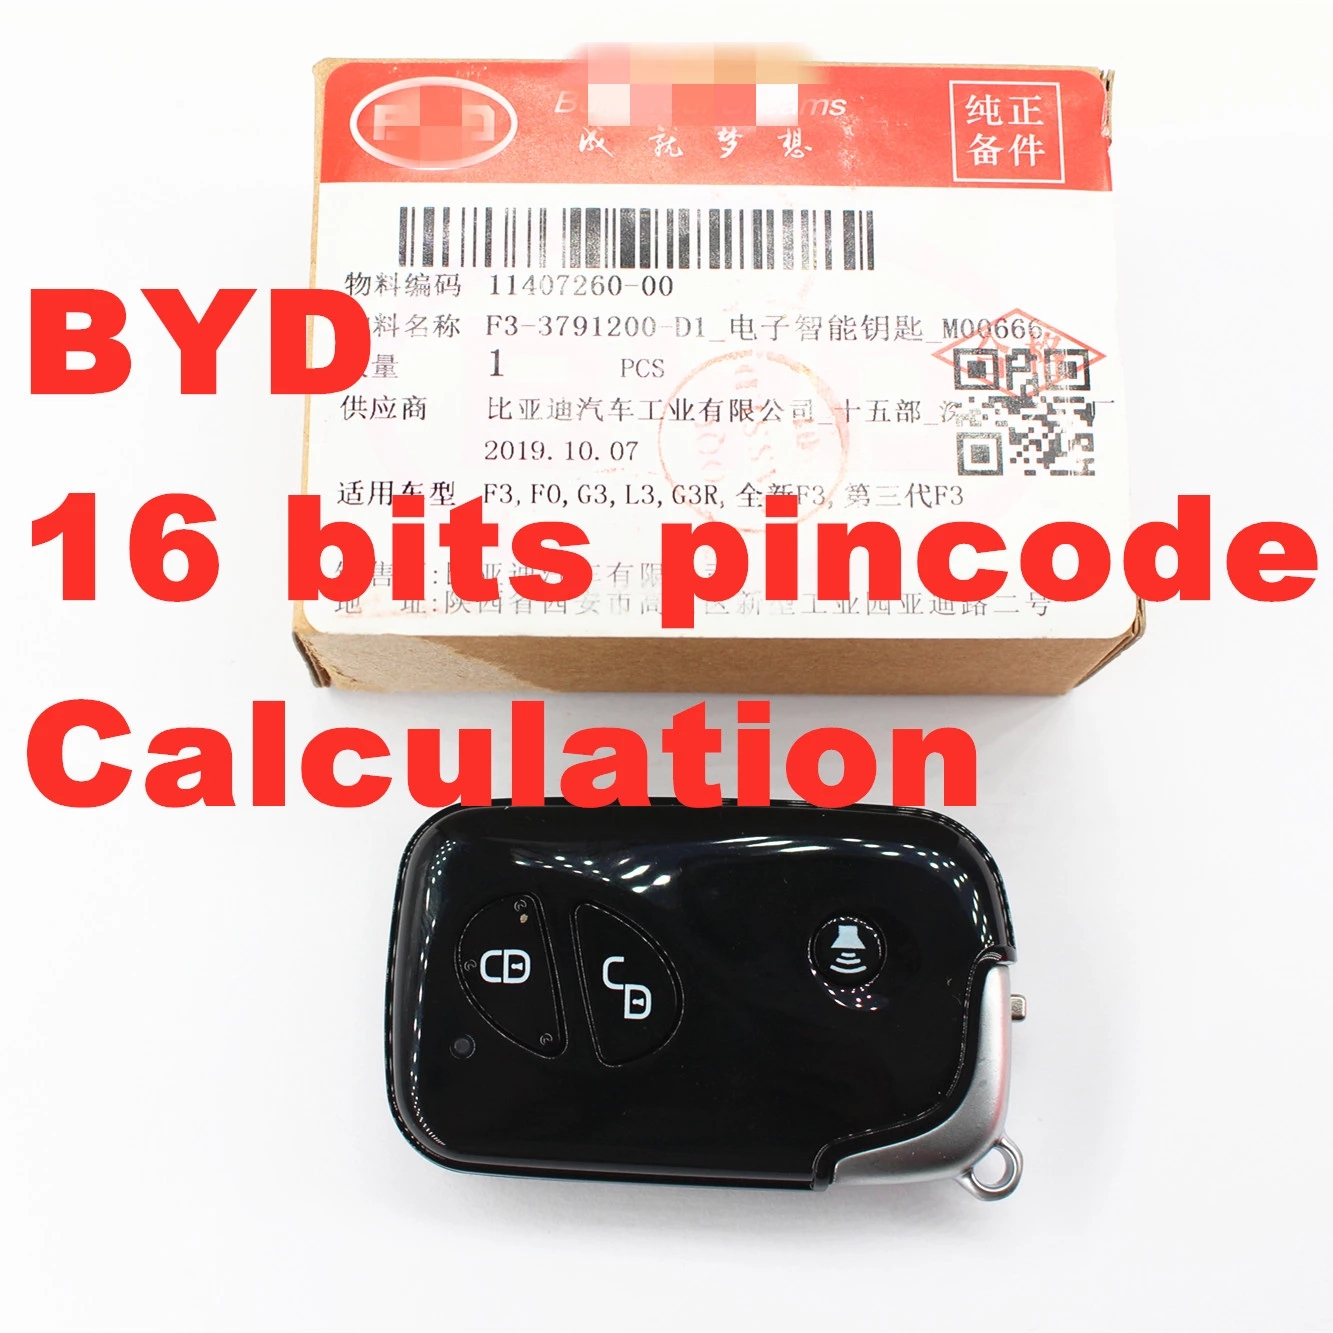 16-bit byd immobilizer pin code calculation service 1 order